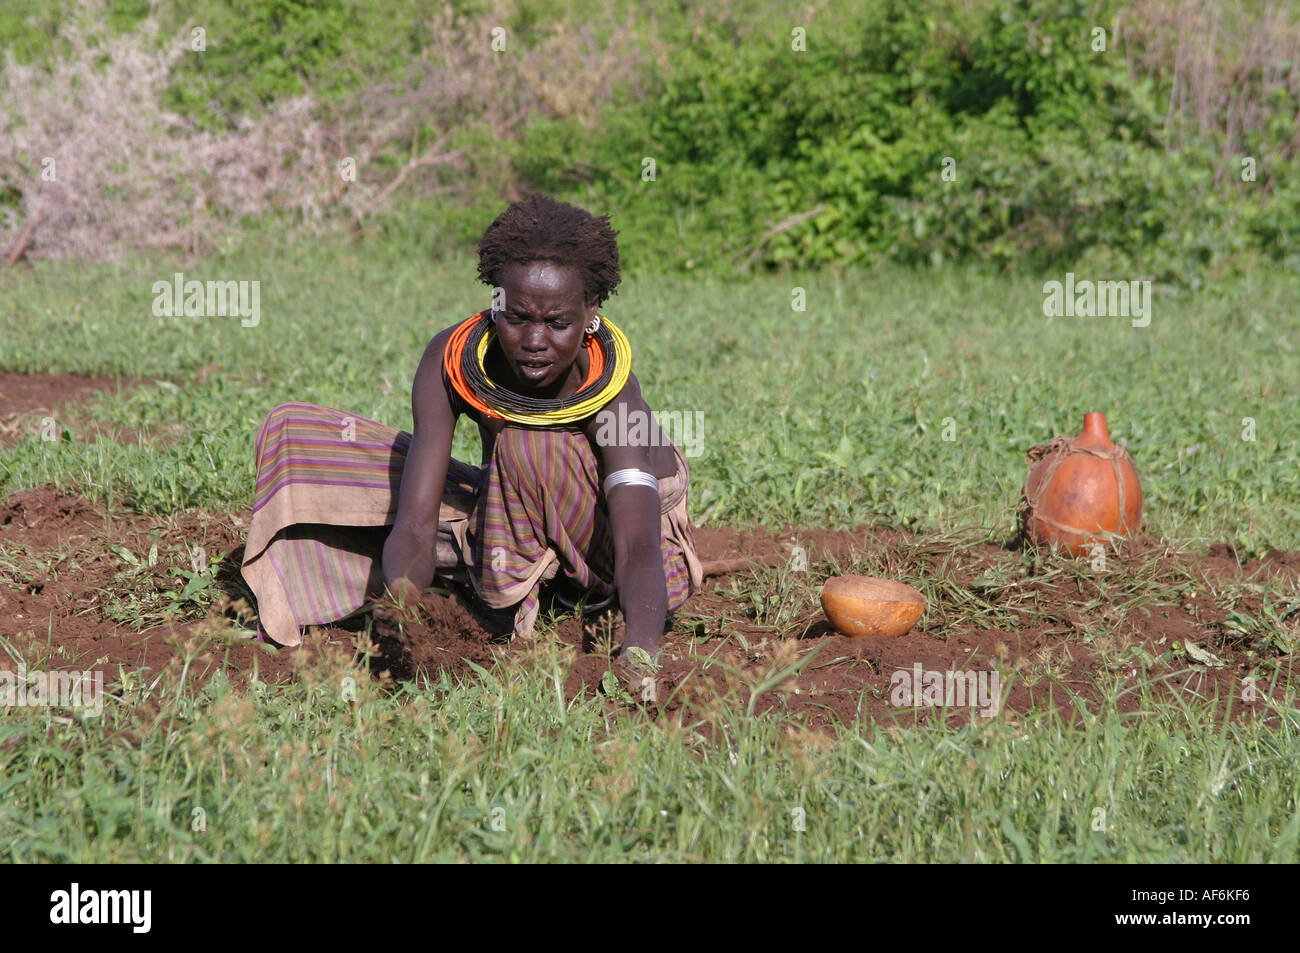 geography / travel, South Sudan, agriculture, Toposa village, near Nyanyagachor, woman working on field, Additional-Rights-Clearance-Info-Not-Available Stock Photo